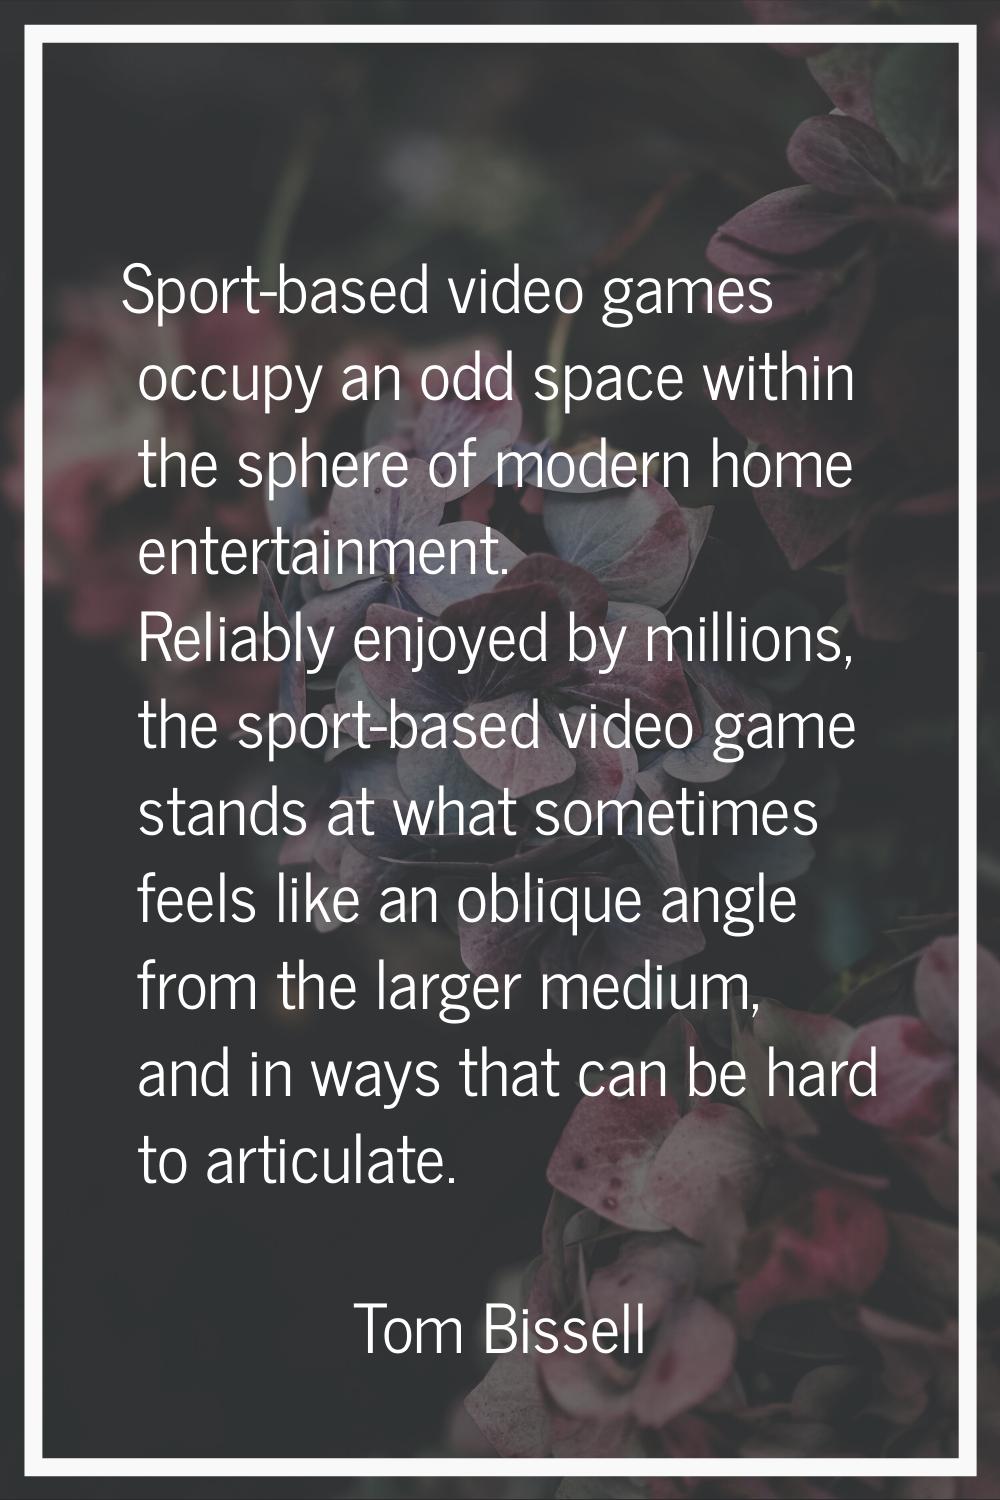 Sport-based video games occupy an odd space within the sphere of modern home entertainment. Reliabl